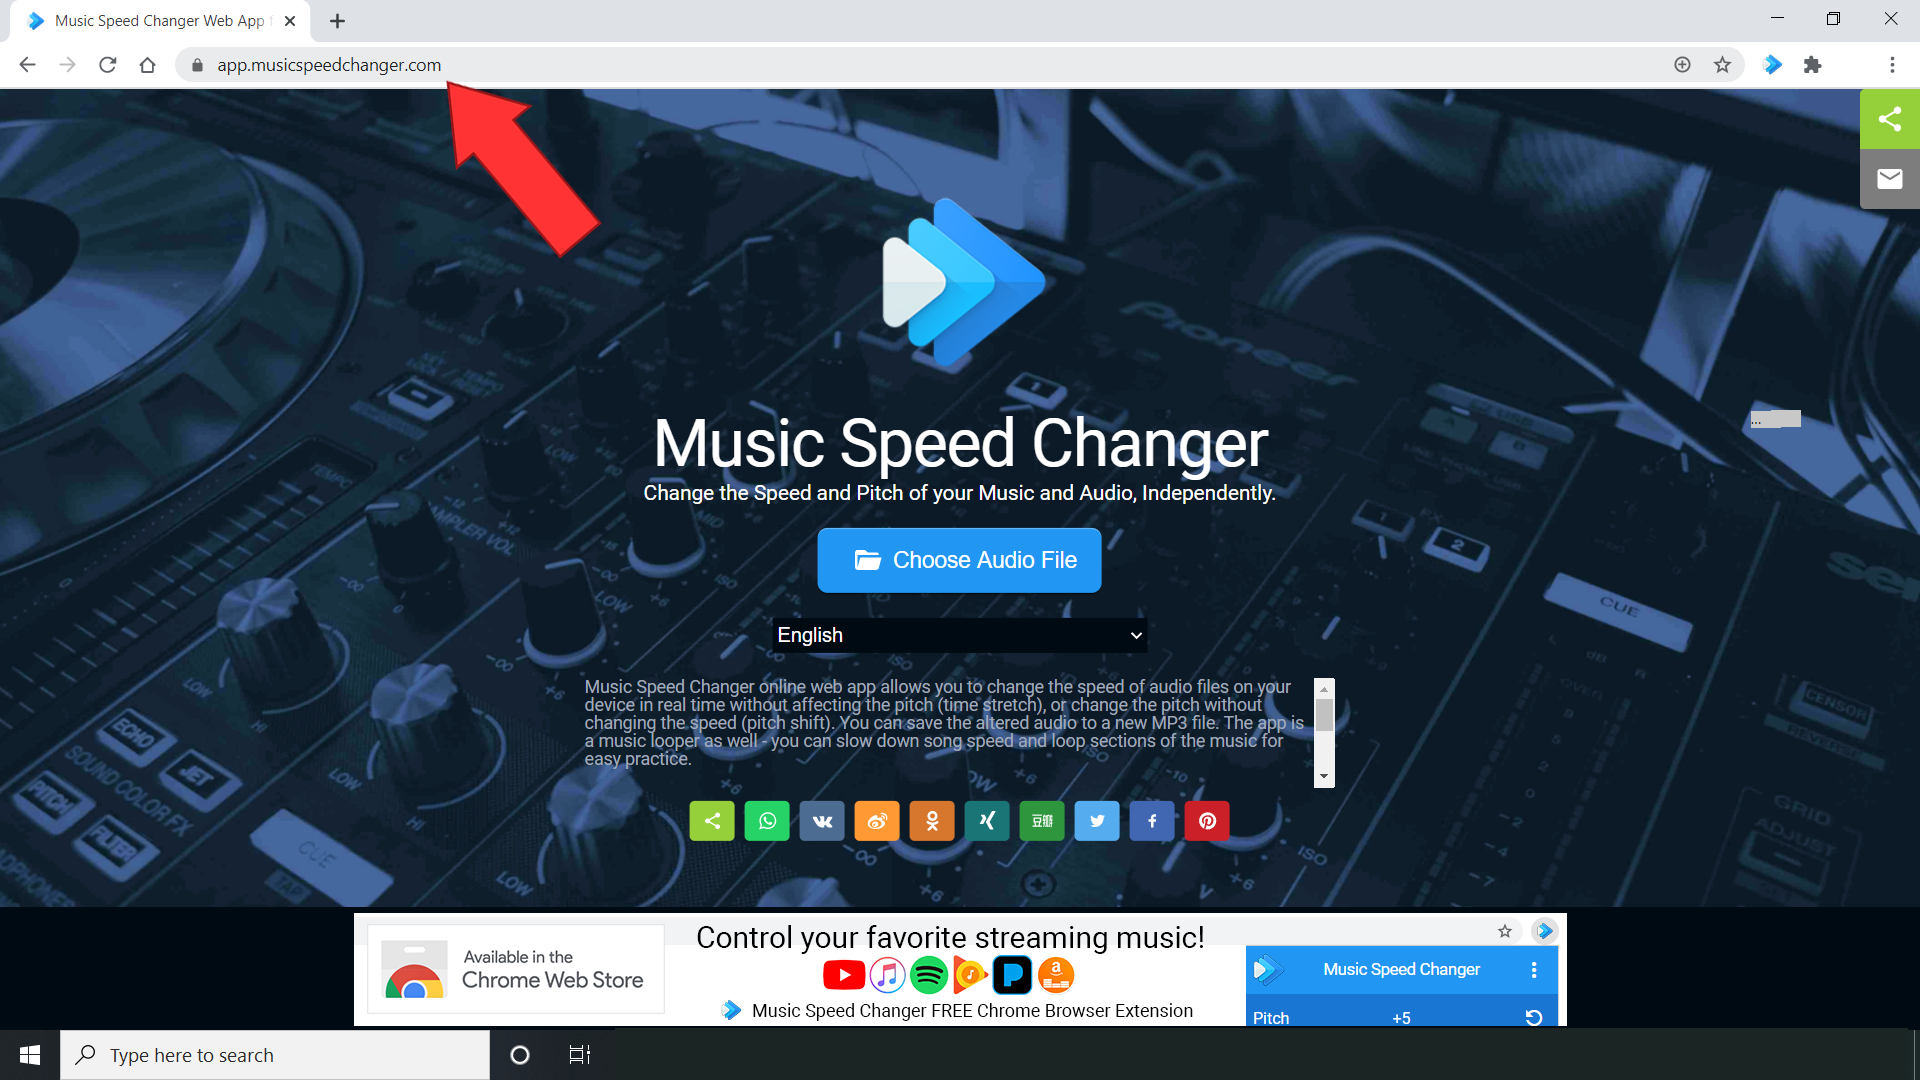 Go to the Music Speed Changer Web App